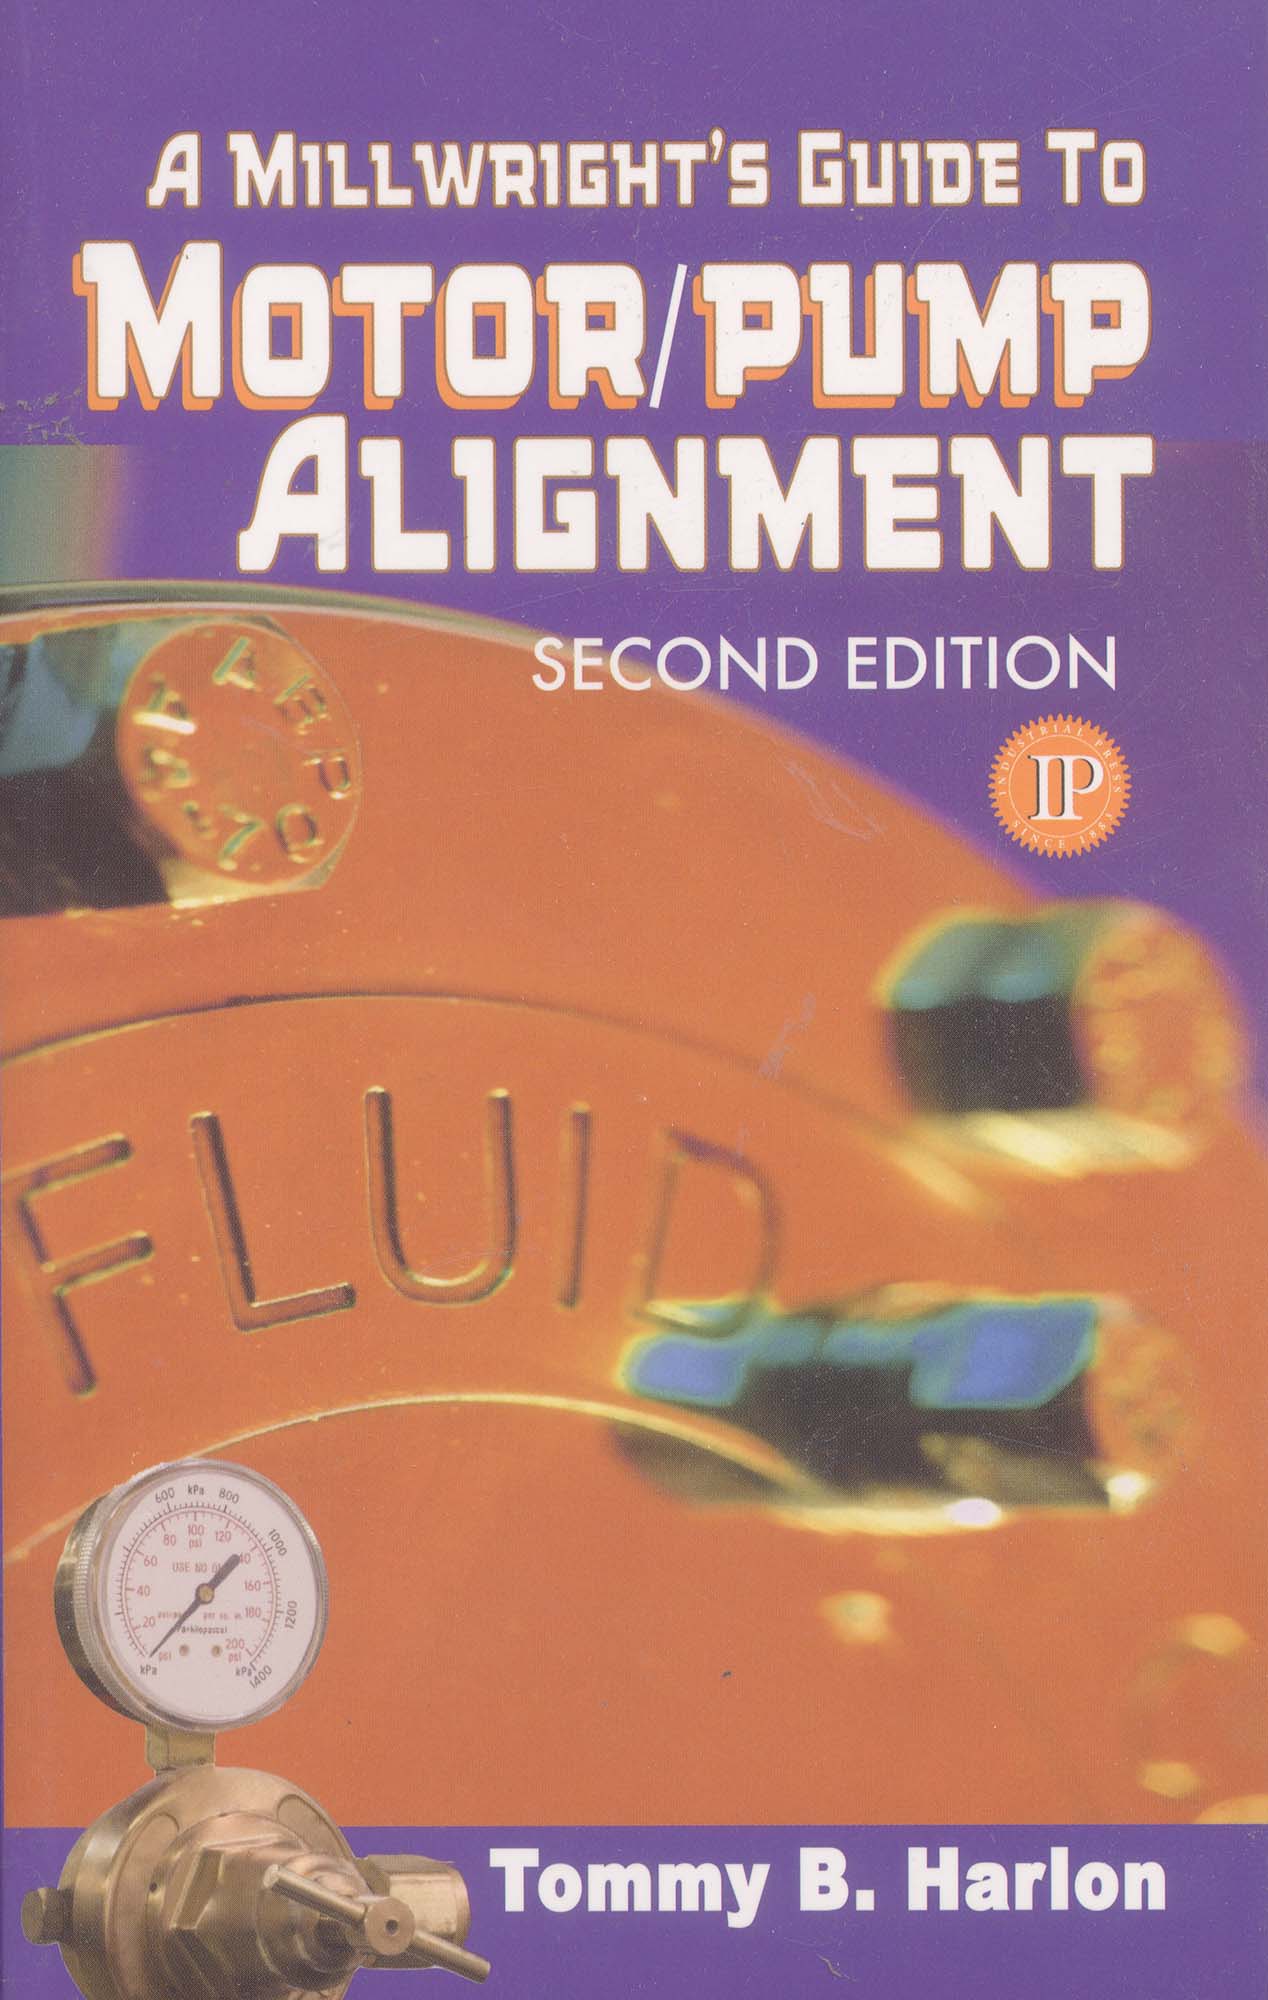 Book-MWs Guide to Motor/Pump Alignment